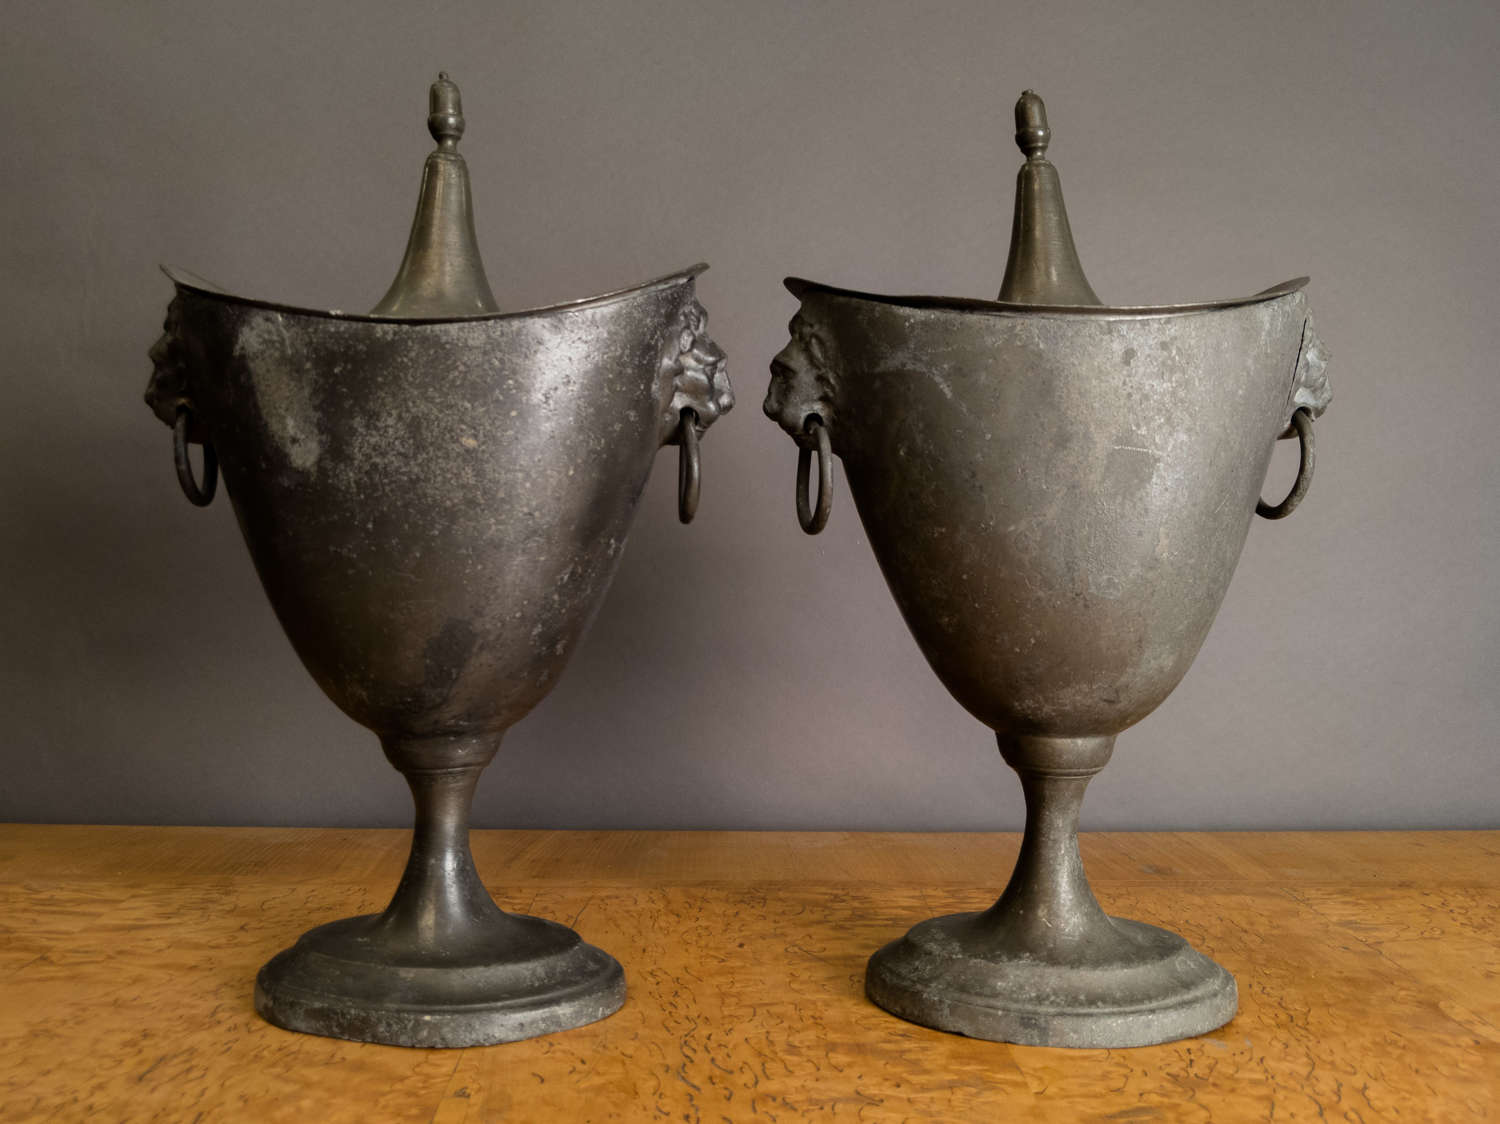 A Mid 19th Century pair of Pewter Chestnut Urns